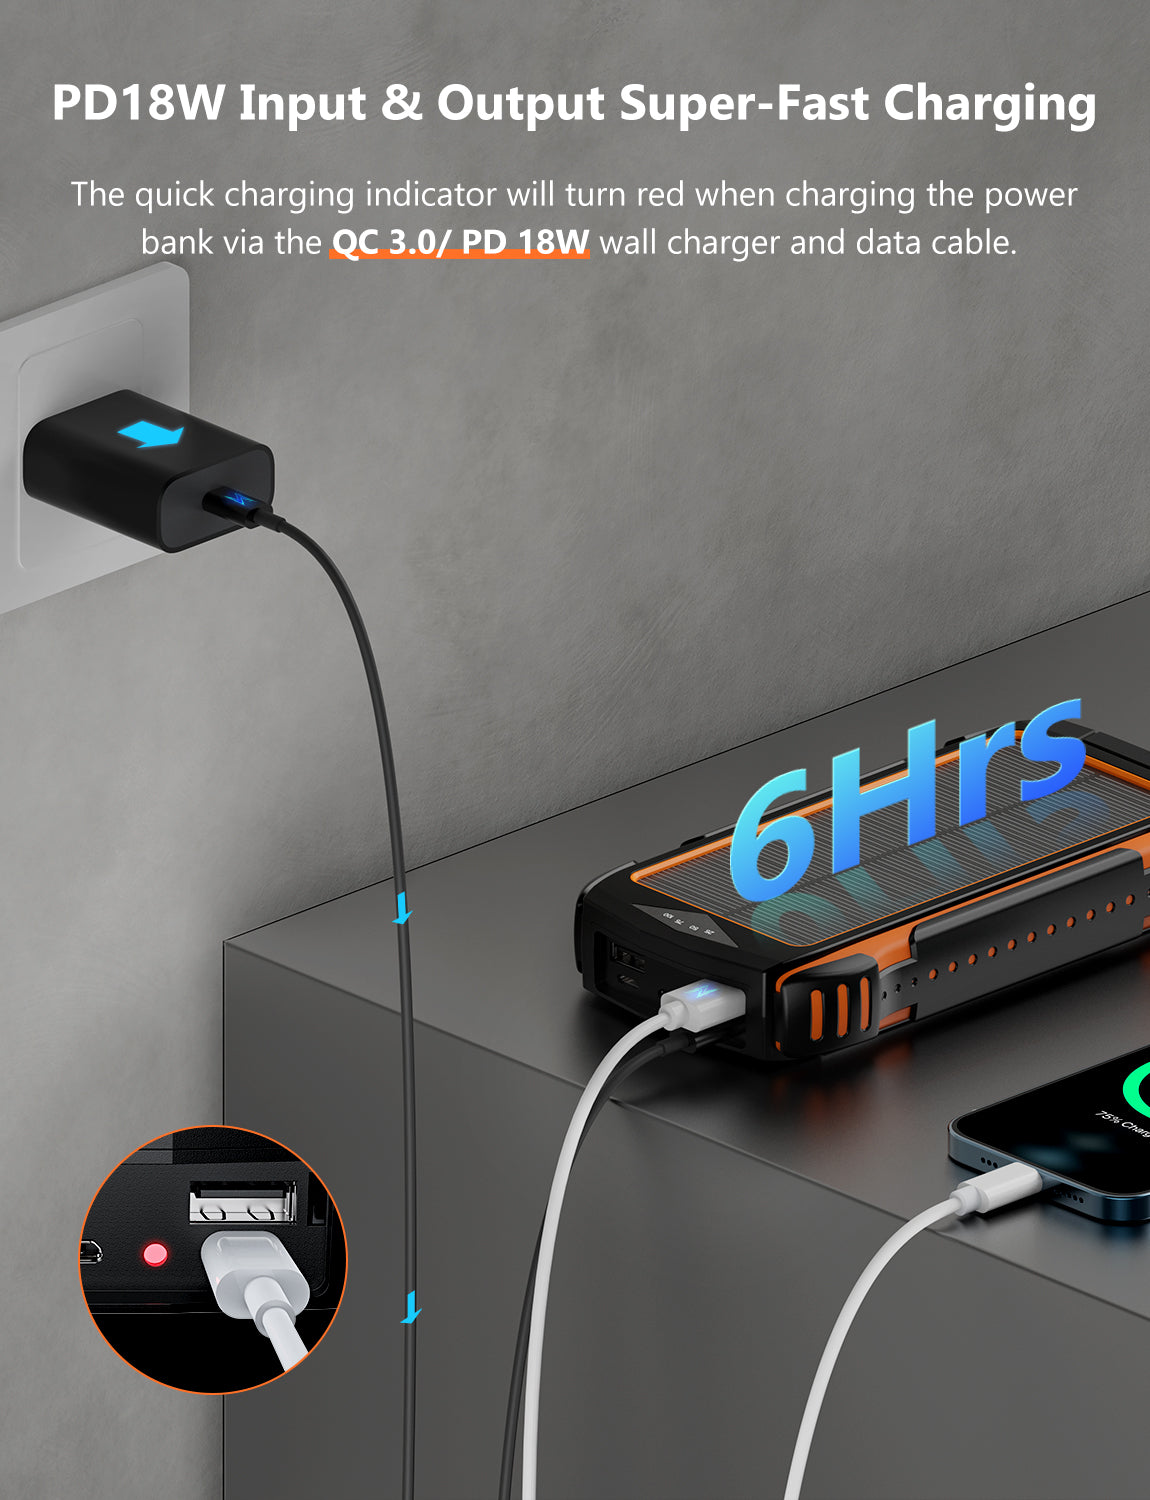 Power bank fully charged in 6 hours with PD18W fast charging. 